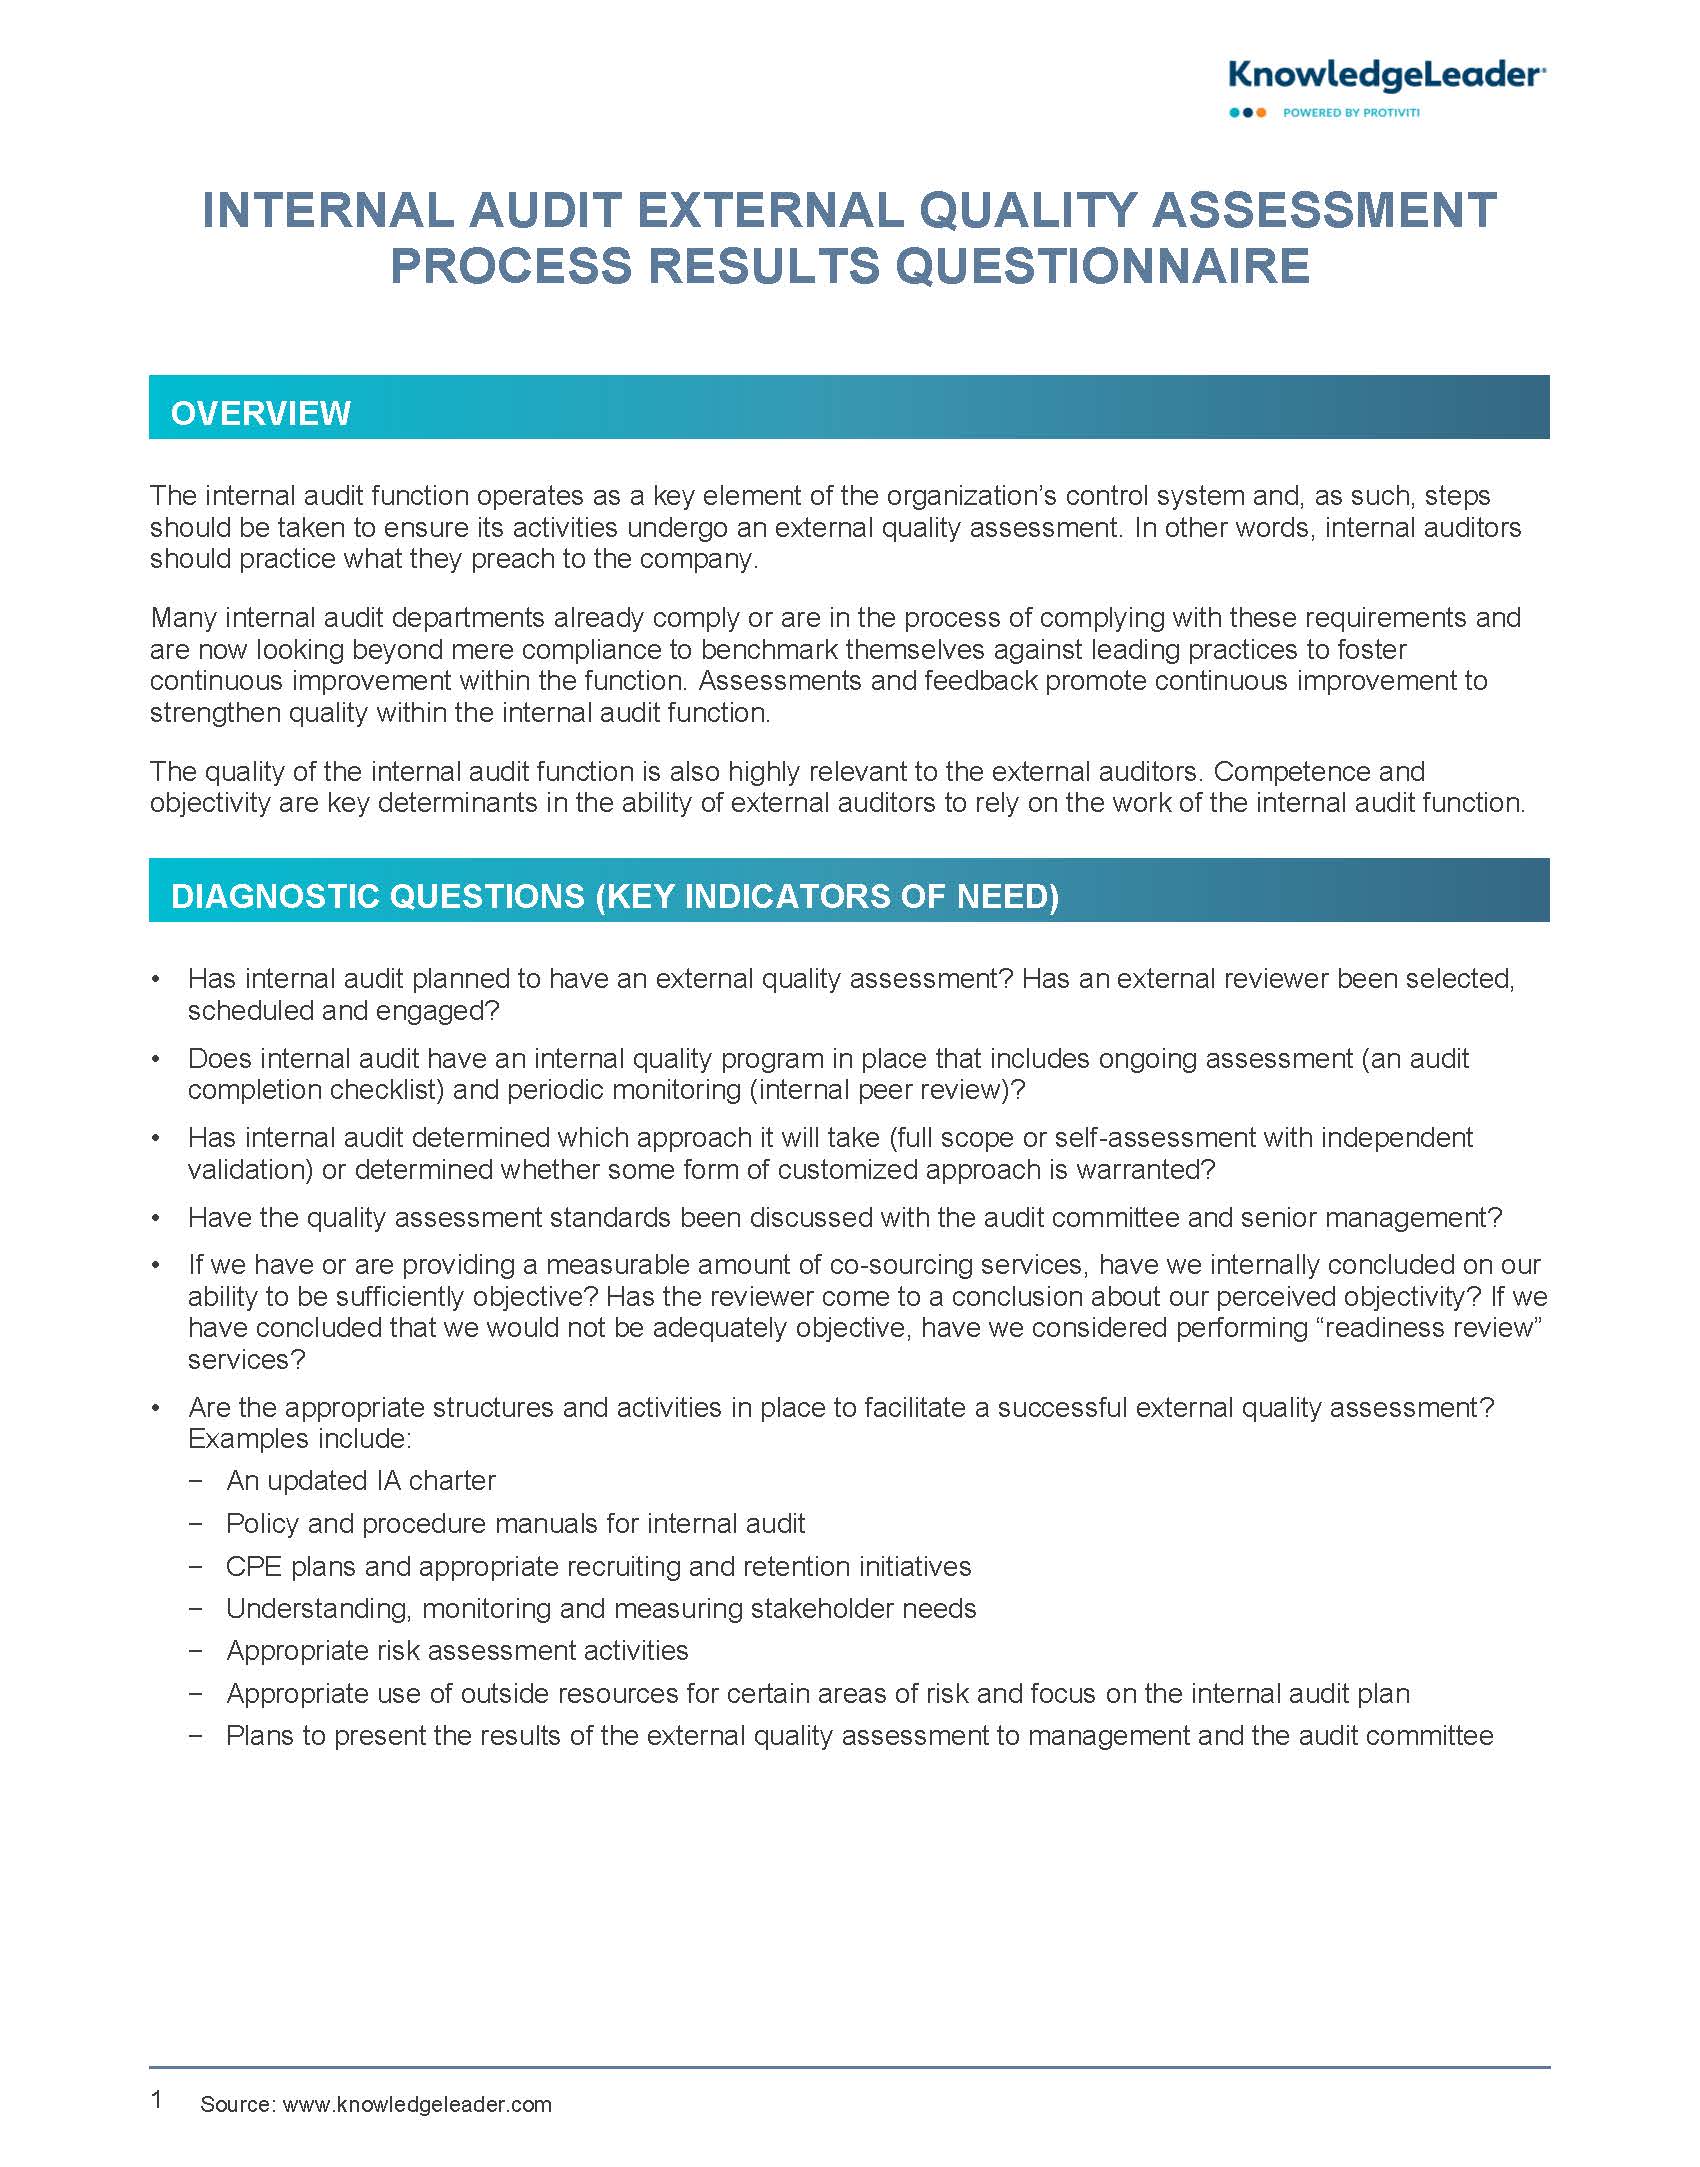 Screenshot of the first page of Internal Audit External Quality Assessment Process Results Questionnaire